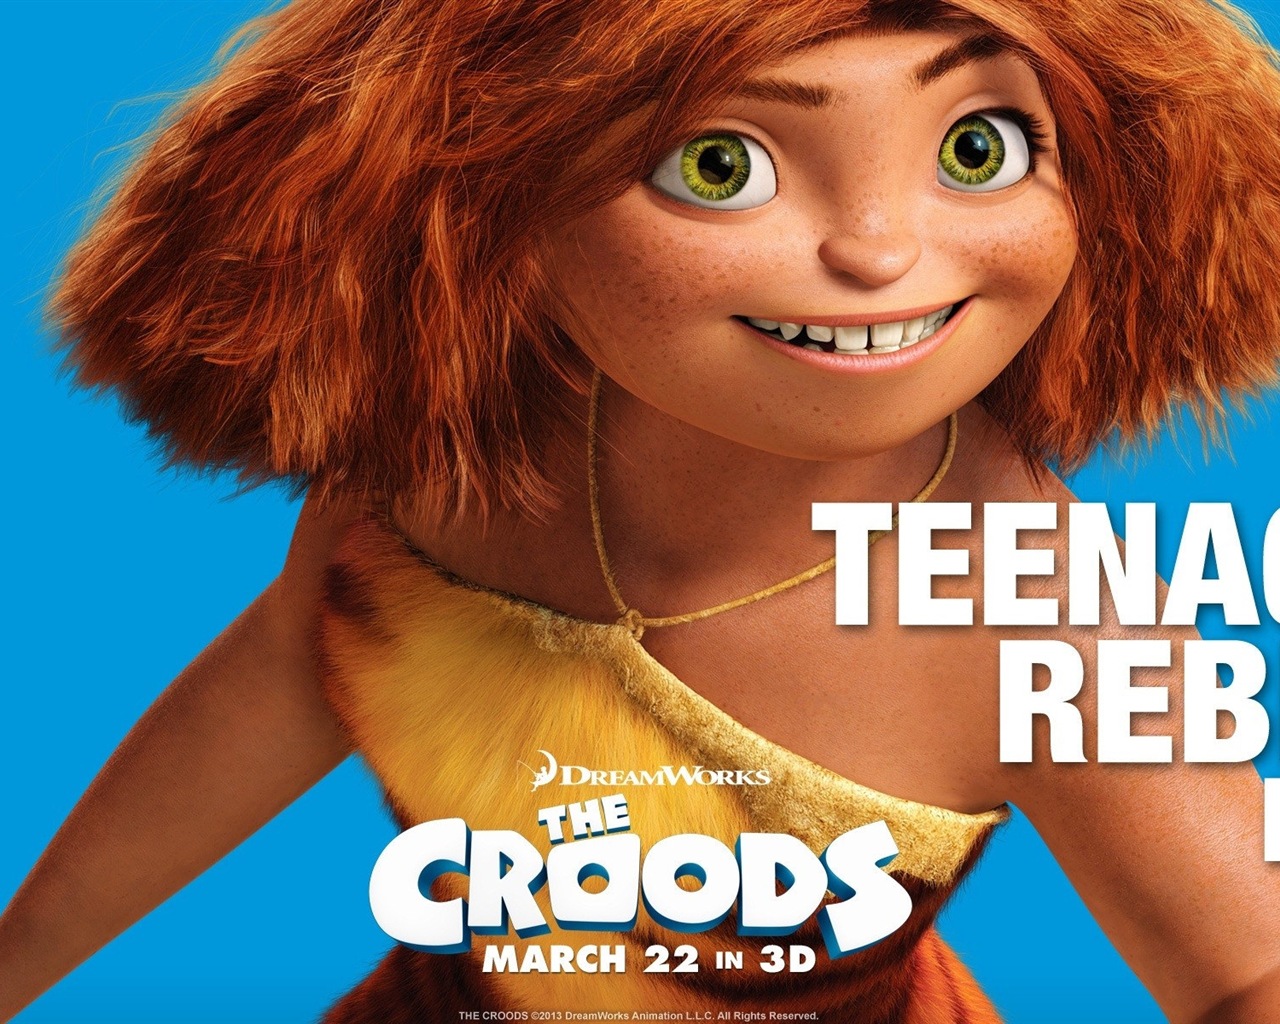 V Croods HD Movie Wallpapers #10 - 1280x1024